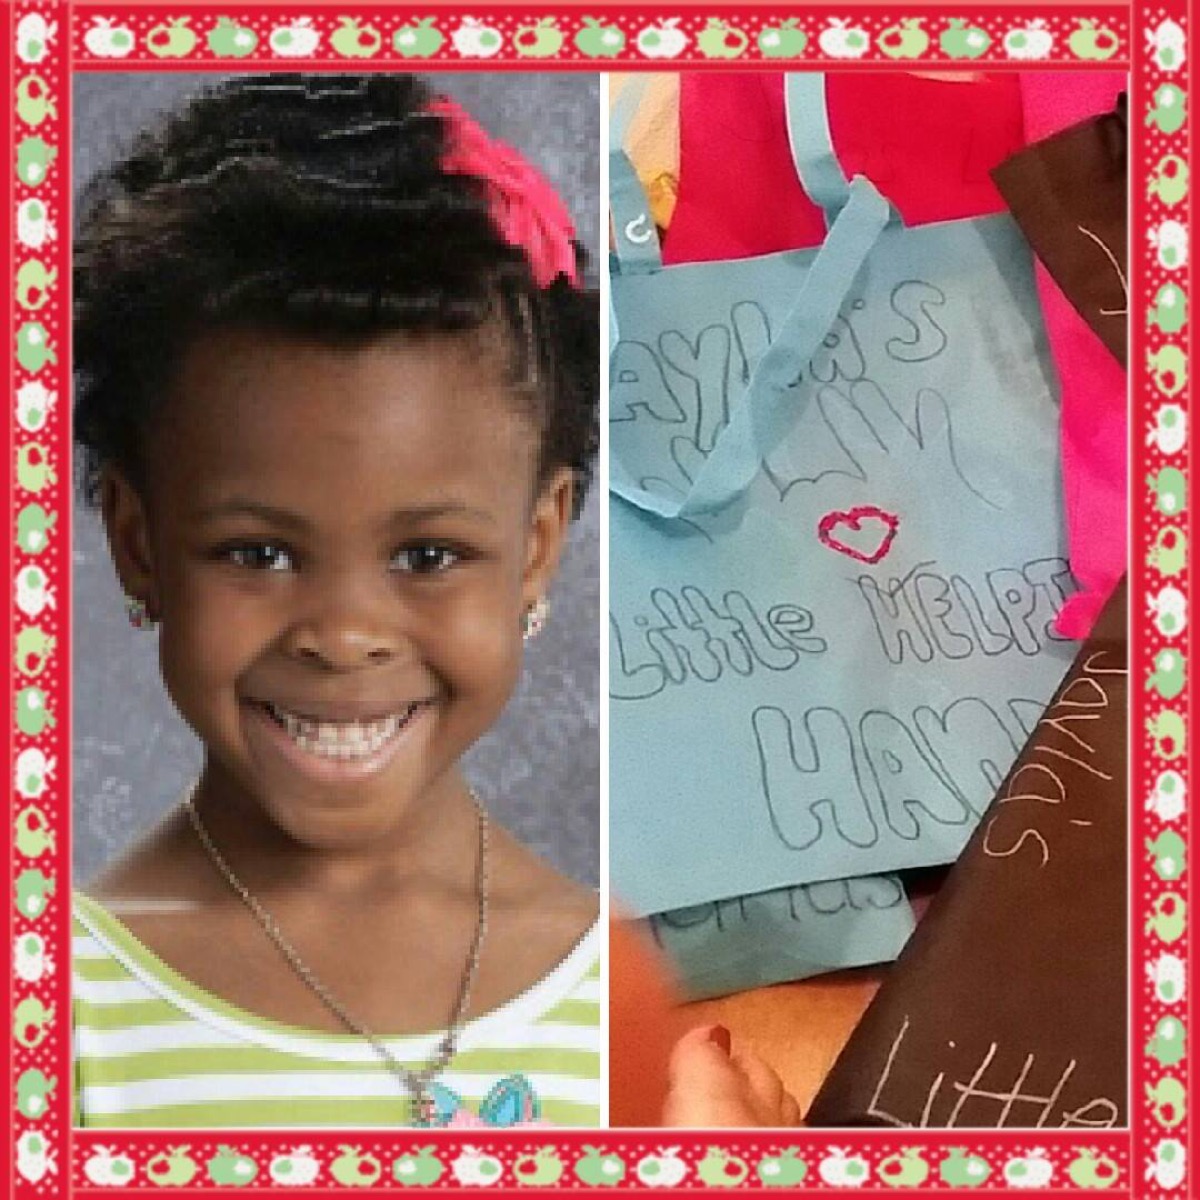 photo split of young smiling black girl and tote bag with kids writing on it